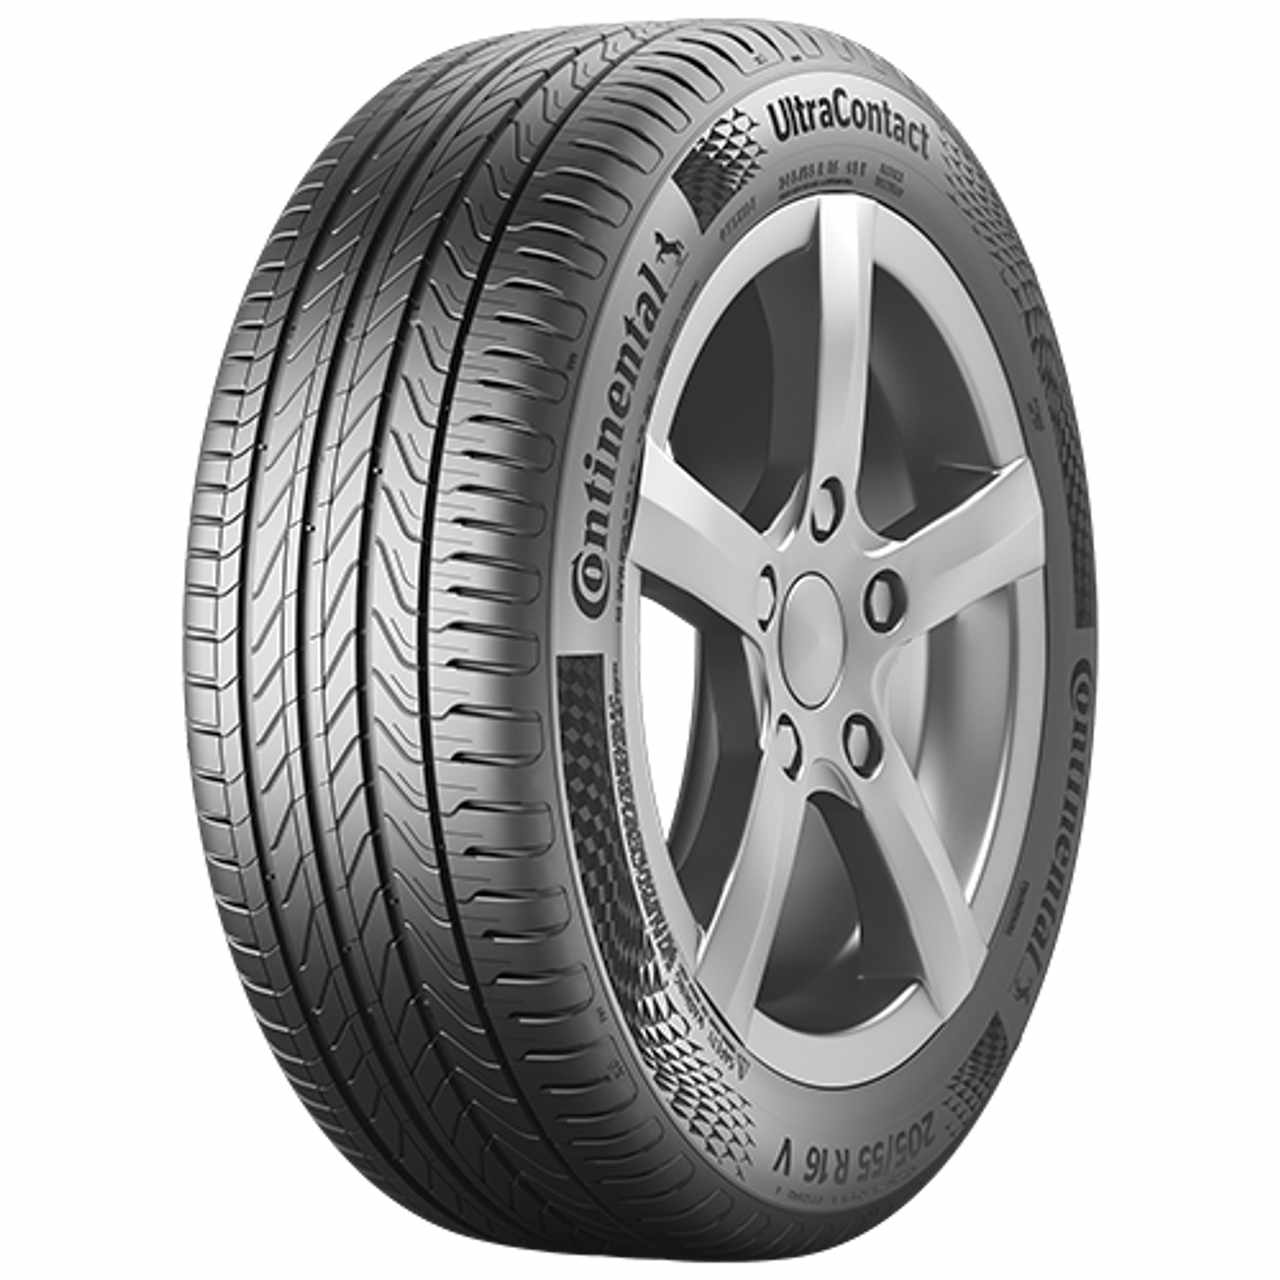 CONTINENTAL ULTRACONTACT (EVc) 235/55R18 100H FR BSW